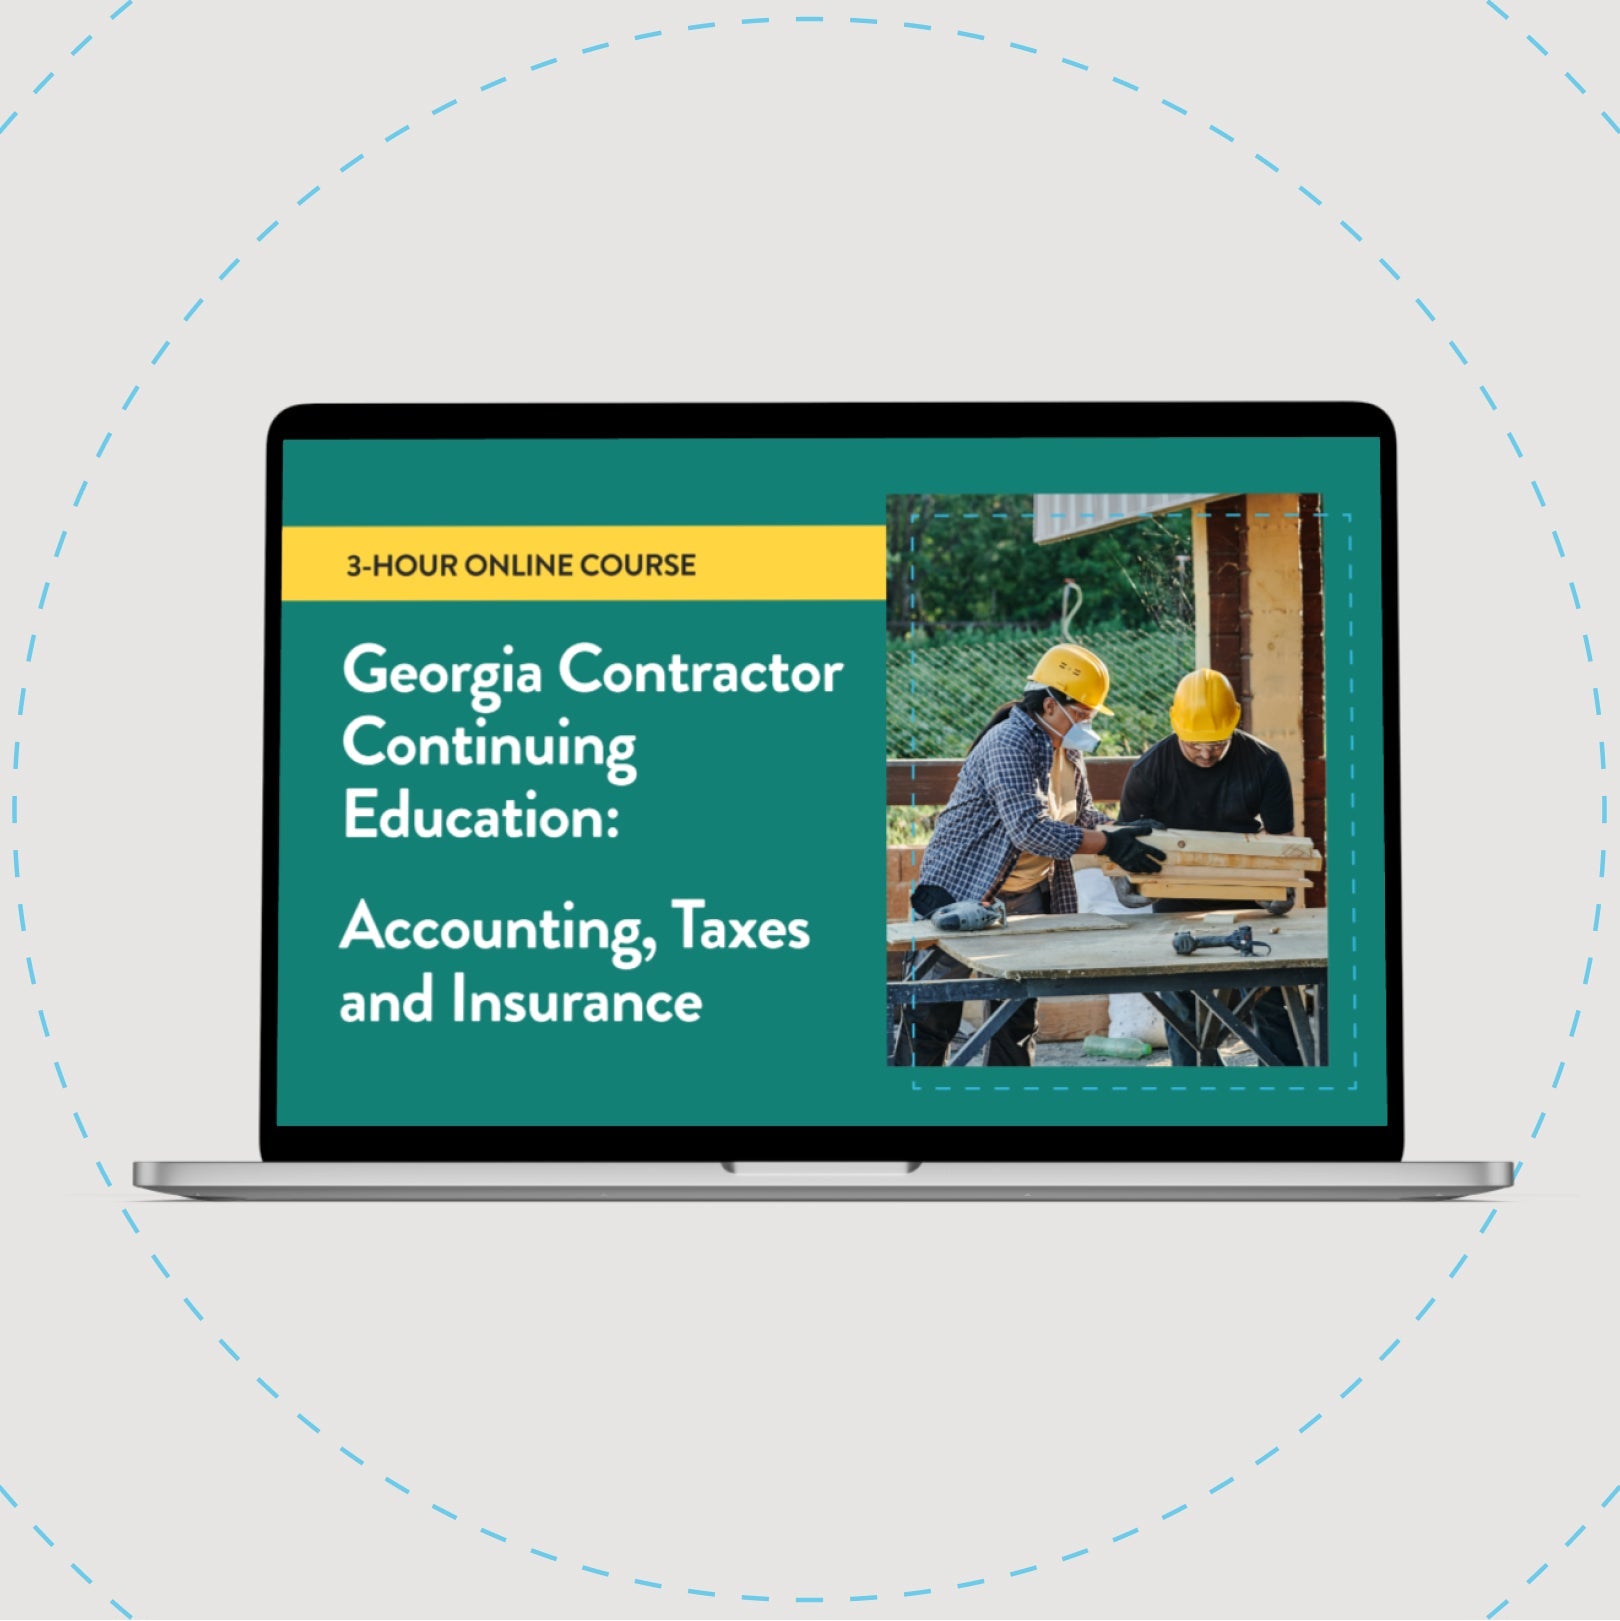 Georgia Contractor Continuing Education: Accounting, Taxes and Insurance - 3-Hour Online Course